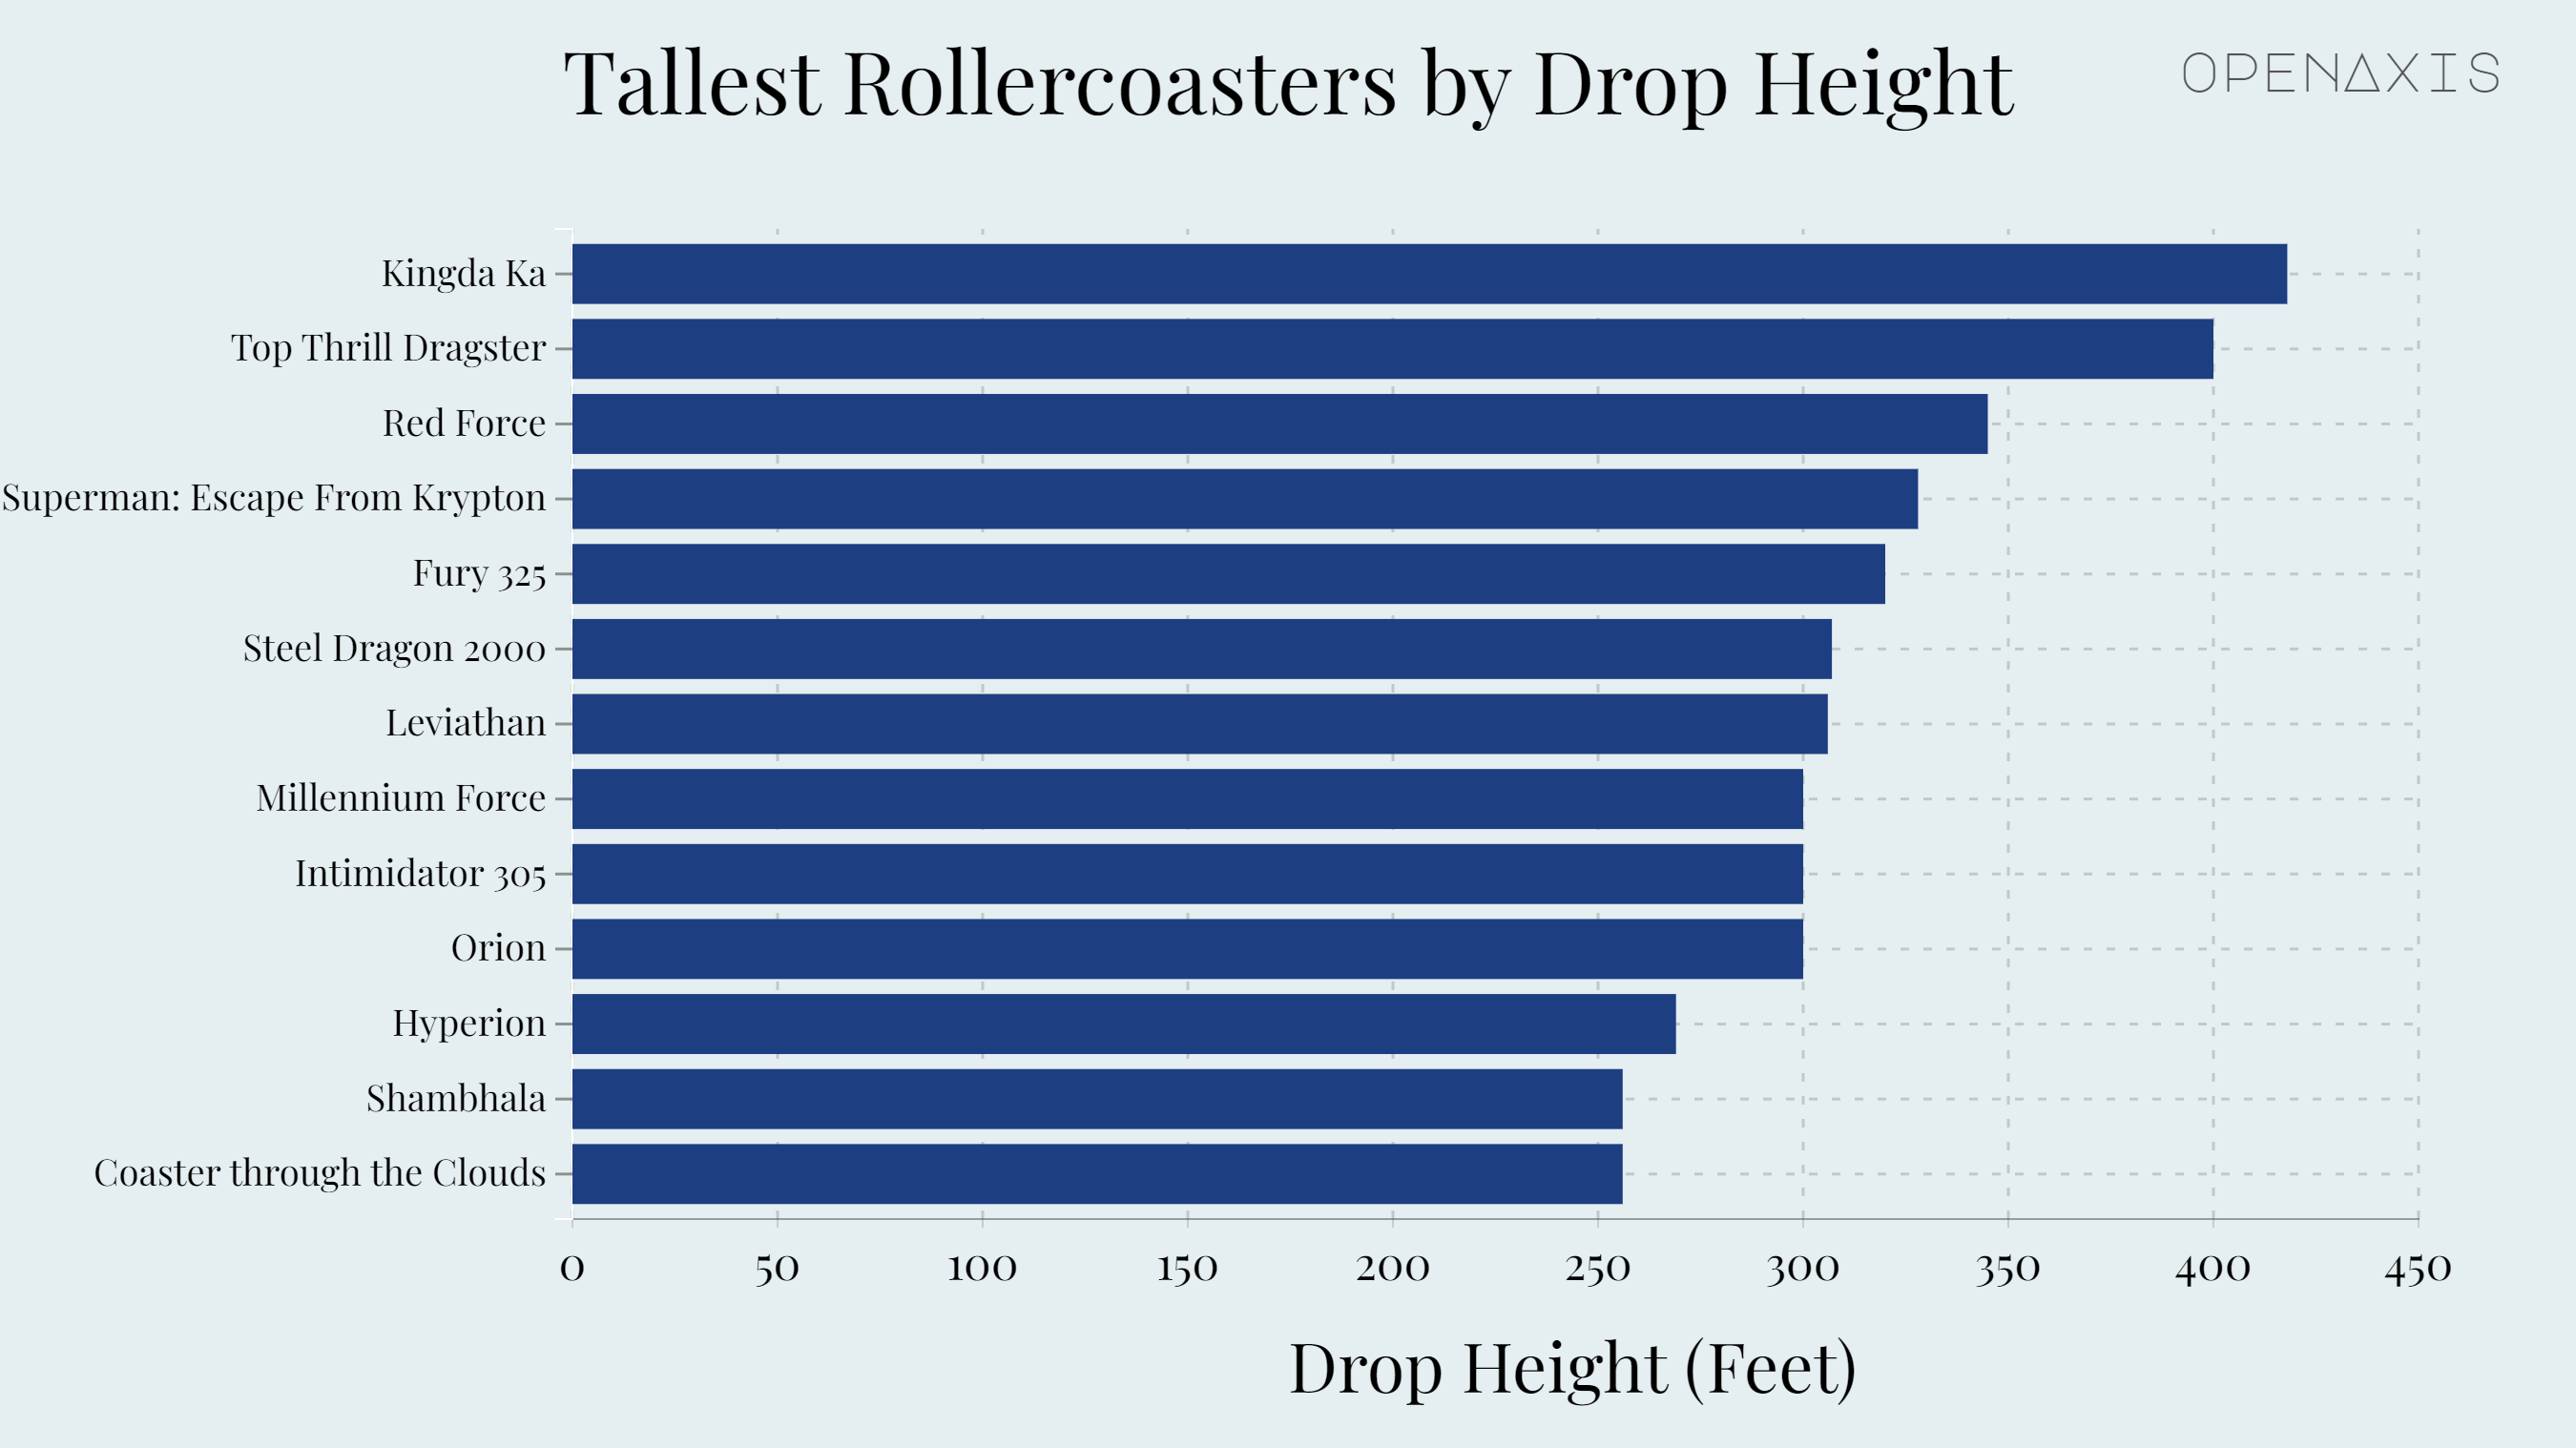 "Tallest Rollercoasters by Drop Height"